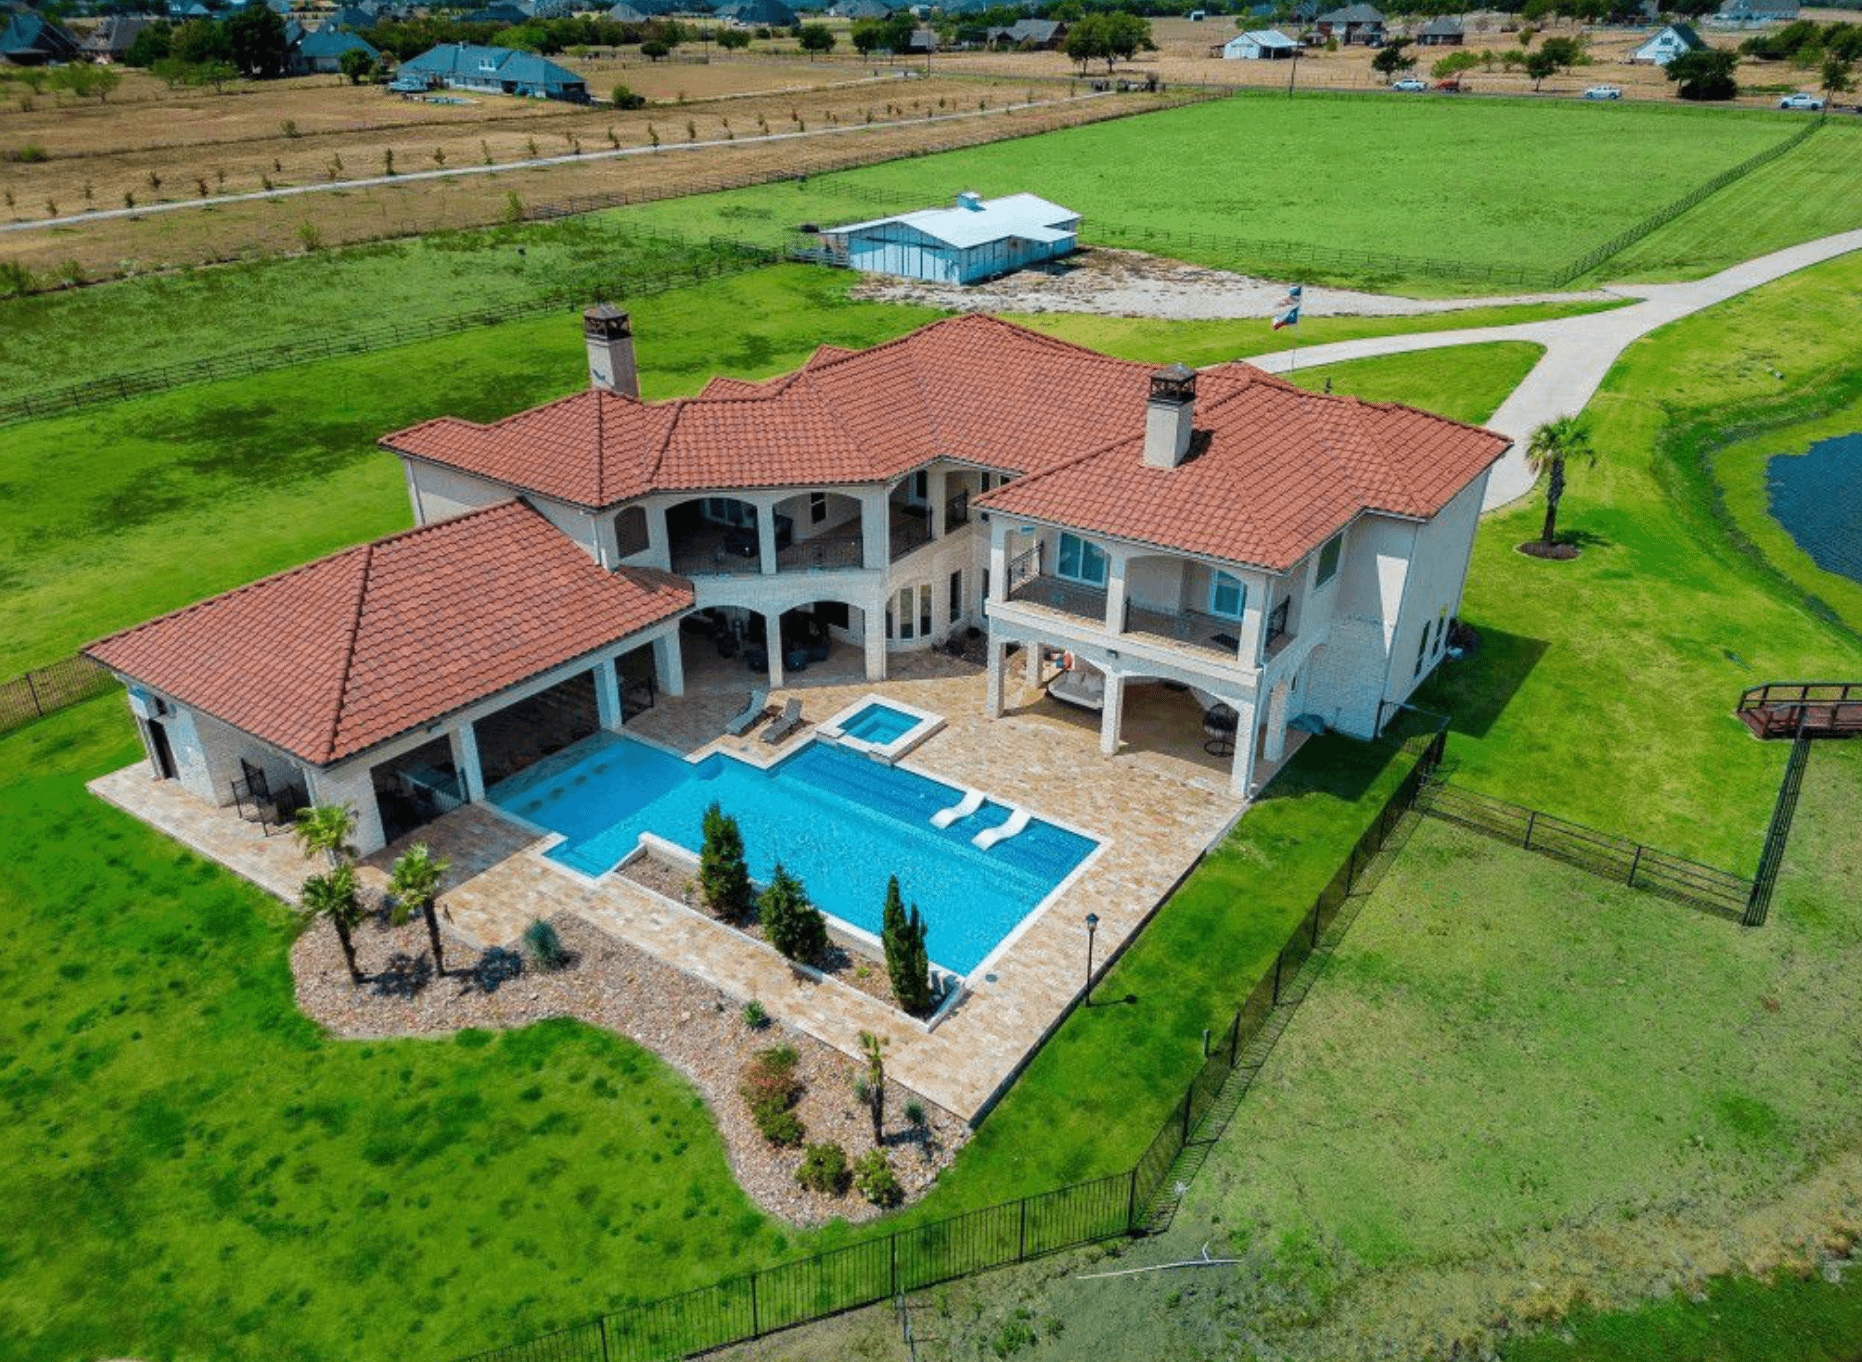 64 Acre Texas Estate With Guest Barn & Pond (PHOTOS)